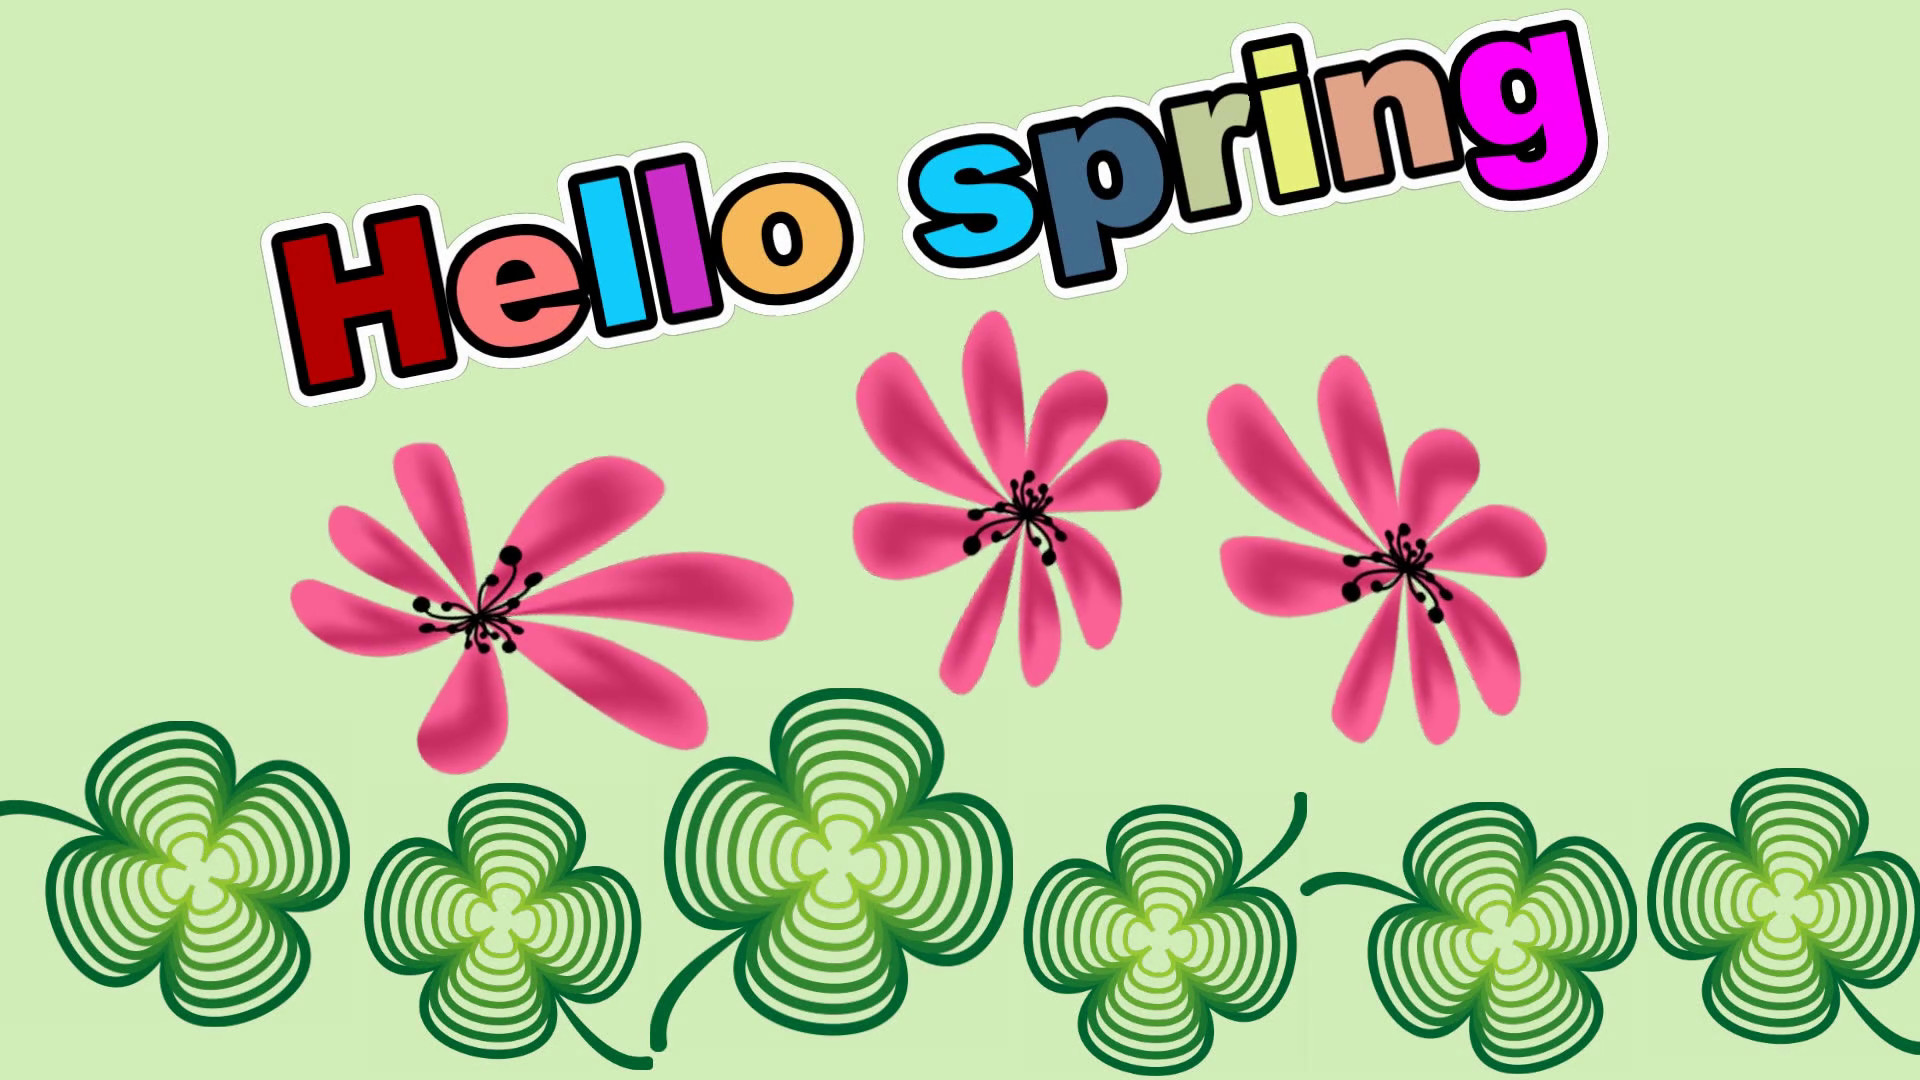 1920x1080 Hello spring animated banner with clover leafs and pink flowers rotating on  green background, animated colorful inscription Motion Background -  Storyblocks ...